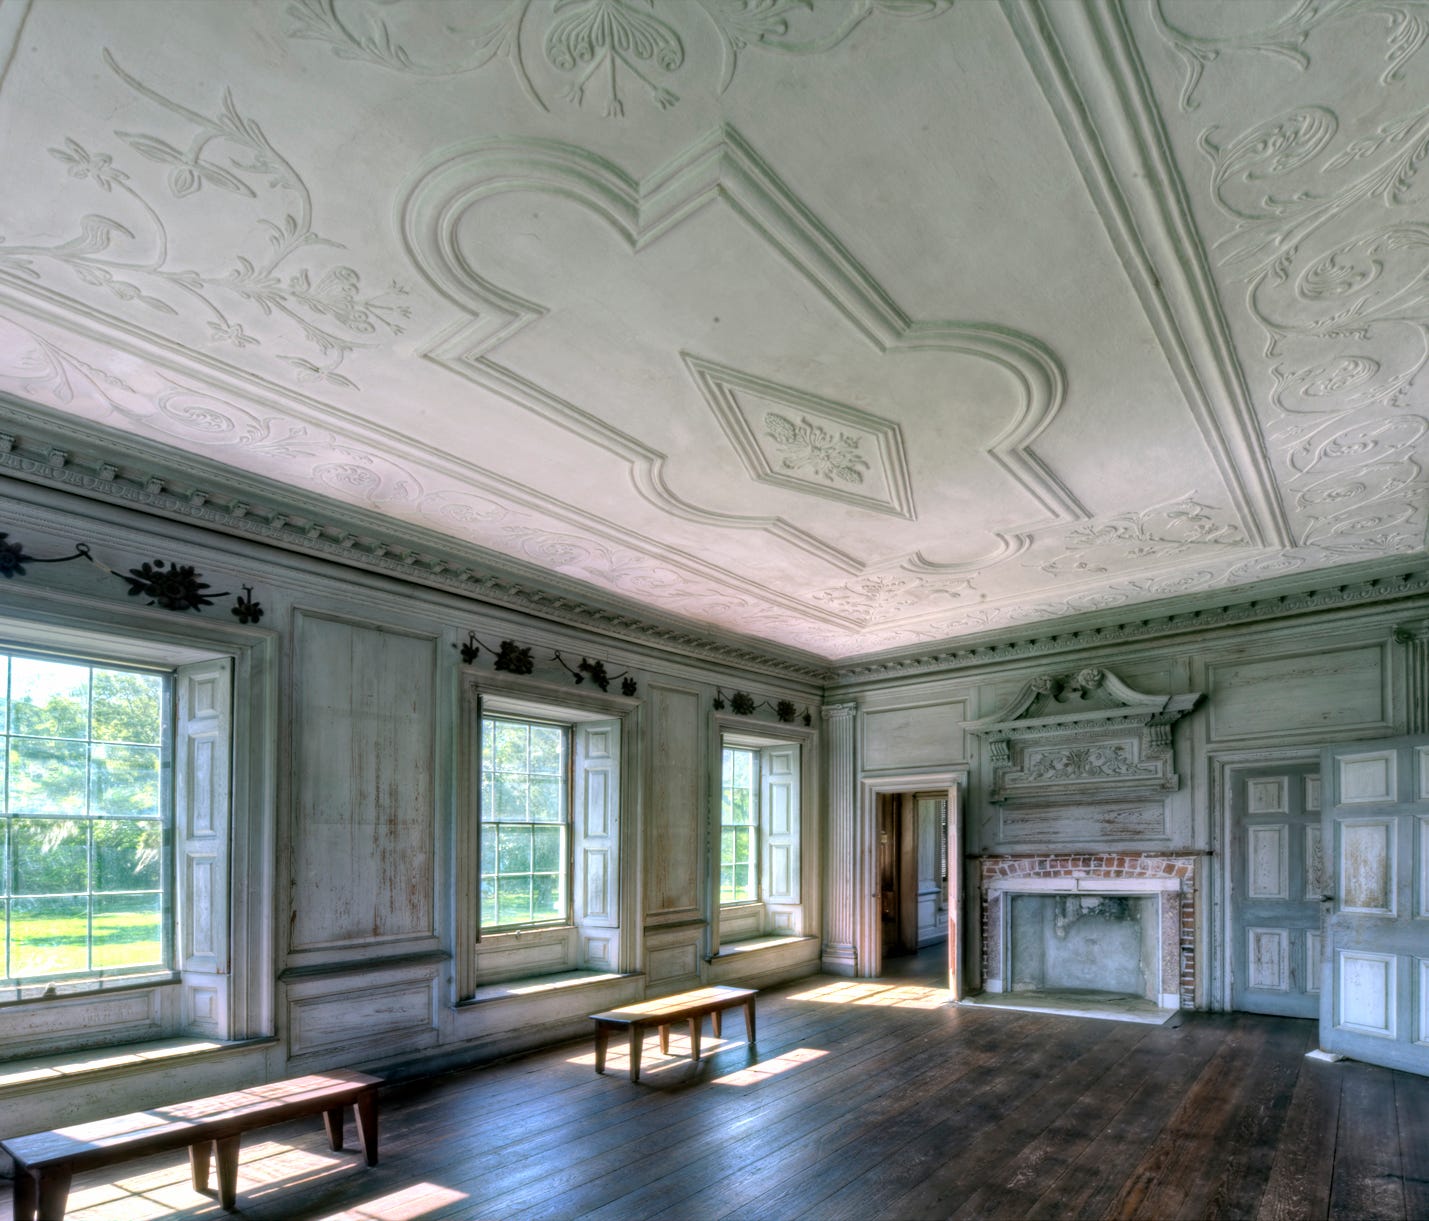 John Drayton's guests would have retired to the first-floor withdrawing room for conversation, games and other social interaction. The ornate ceiling is the only one in the house that is original to the time of construction and considered the oldest 